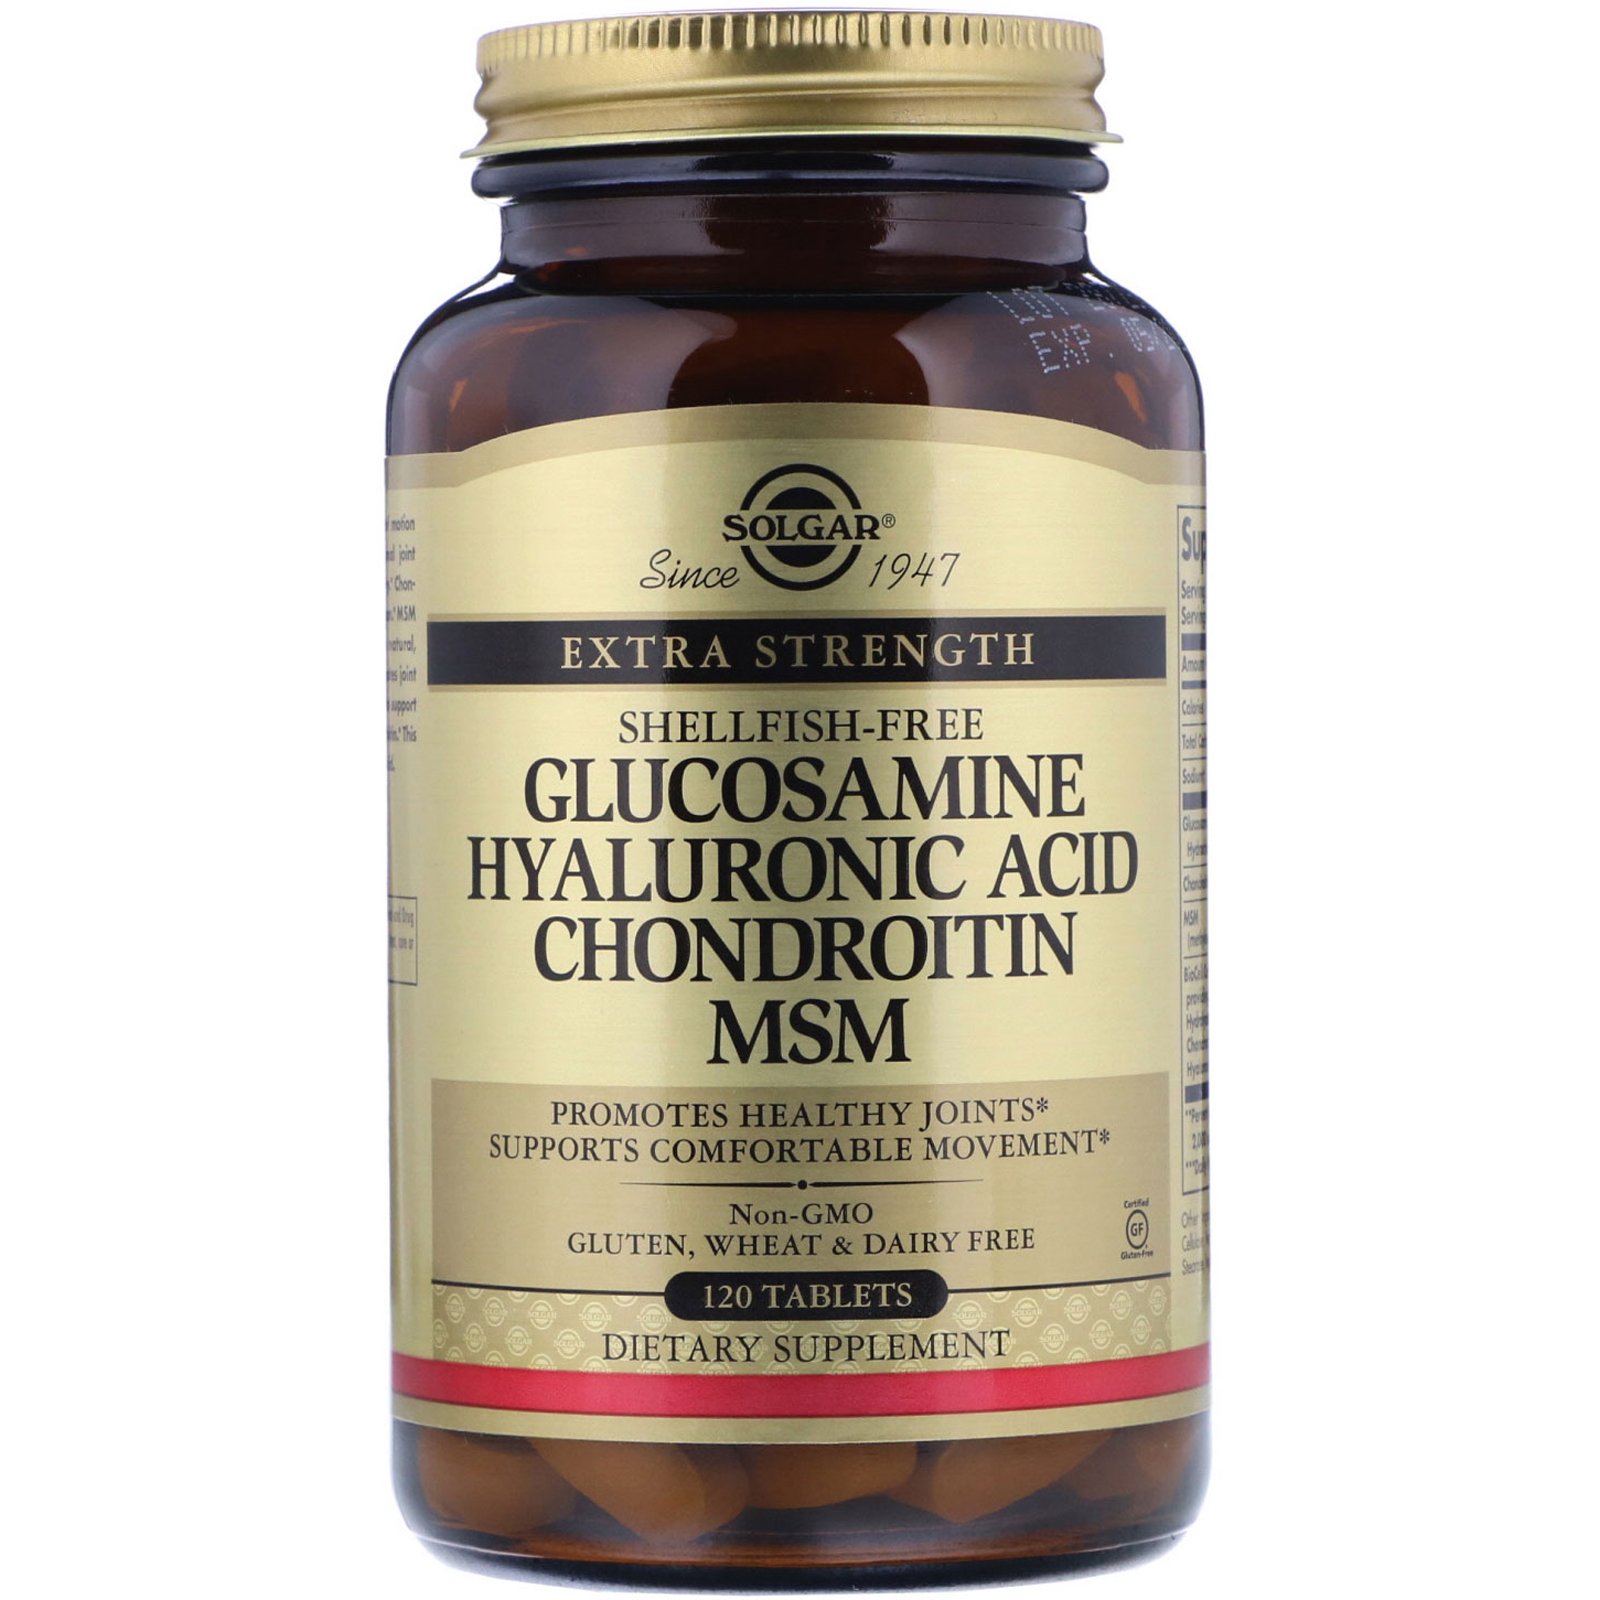 Glucosamine Hyaluronic Acid Chondroitin MSM, 120 pcs, Solgar. Glucosamine Chondroitin. General Health Ligament and Joint strengthening 